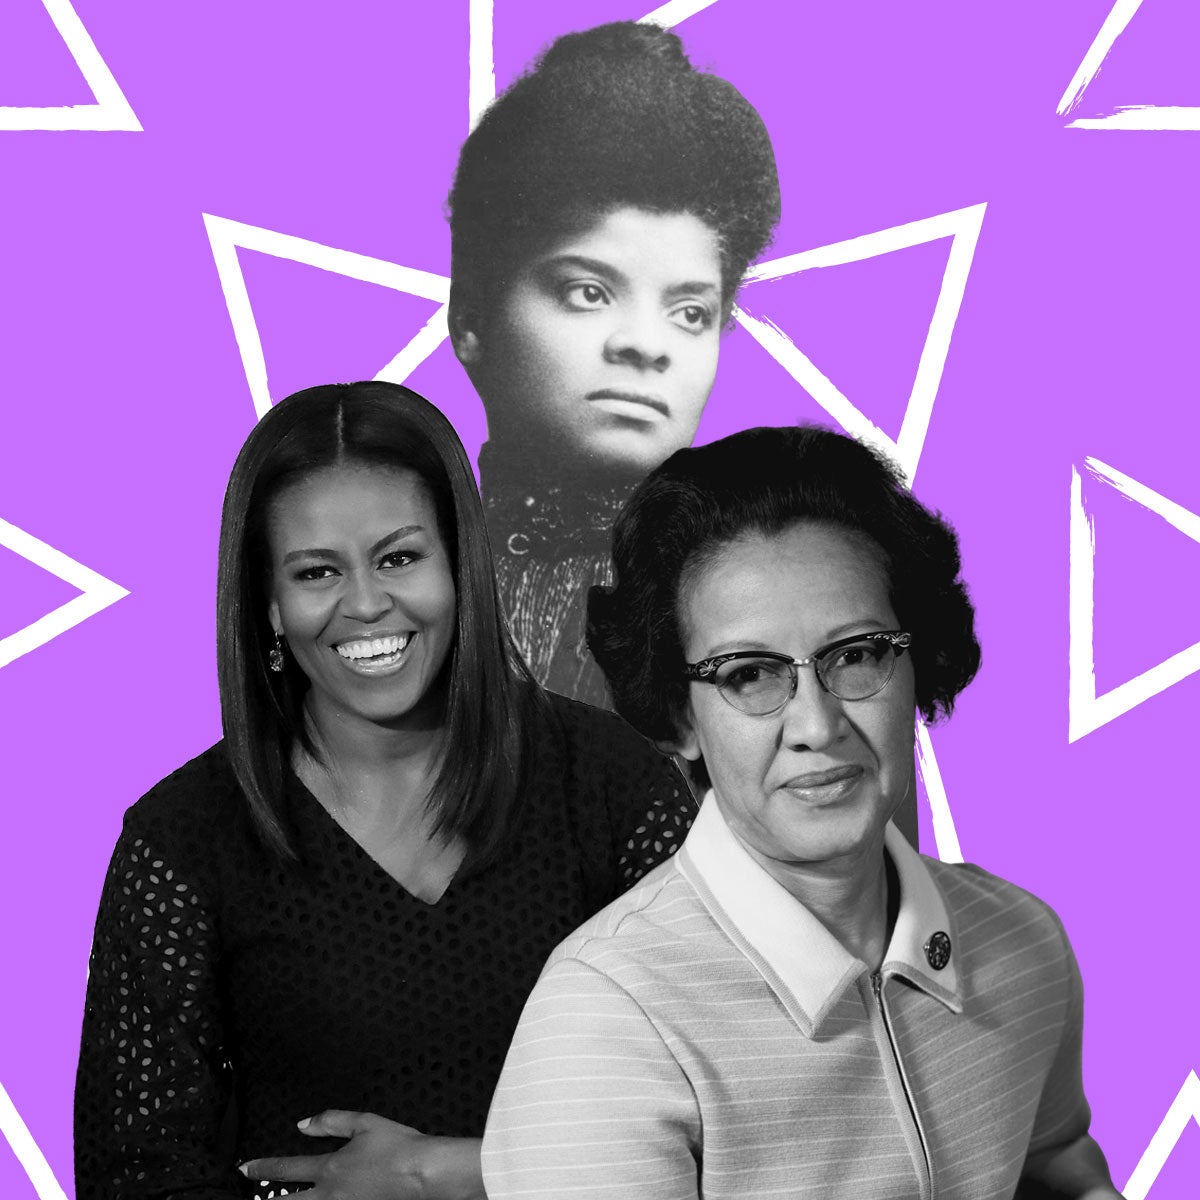 #WarriorWednesdays: 15 Black Women Who Changed The Course of History
